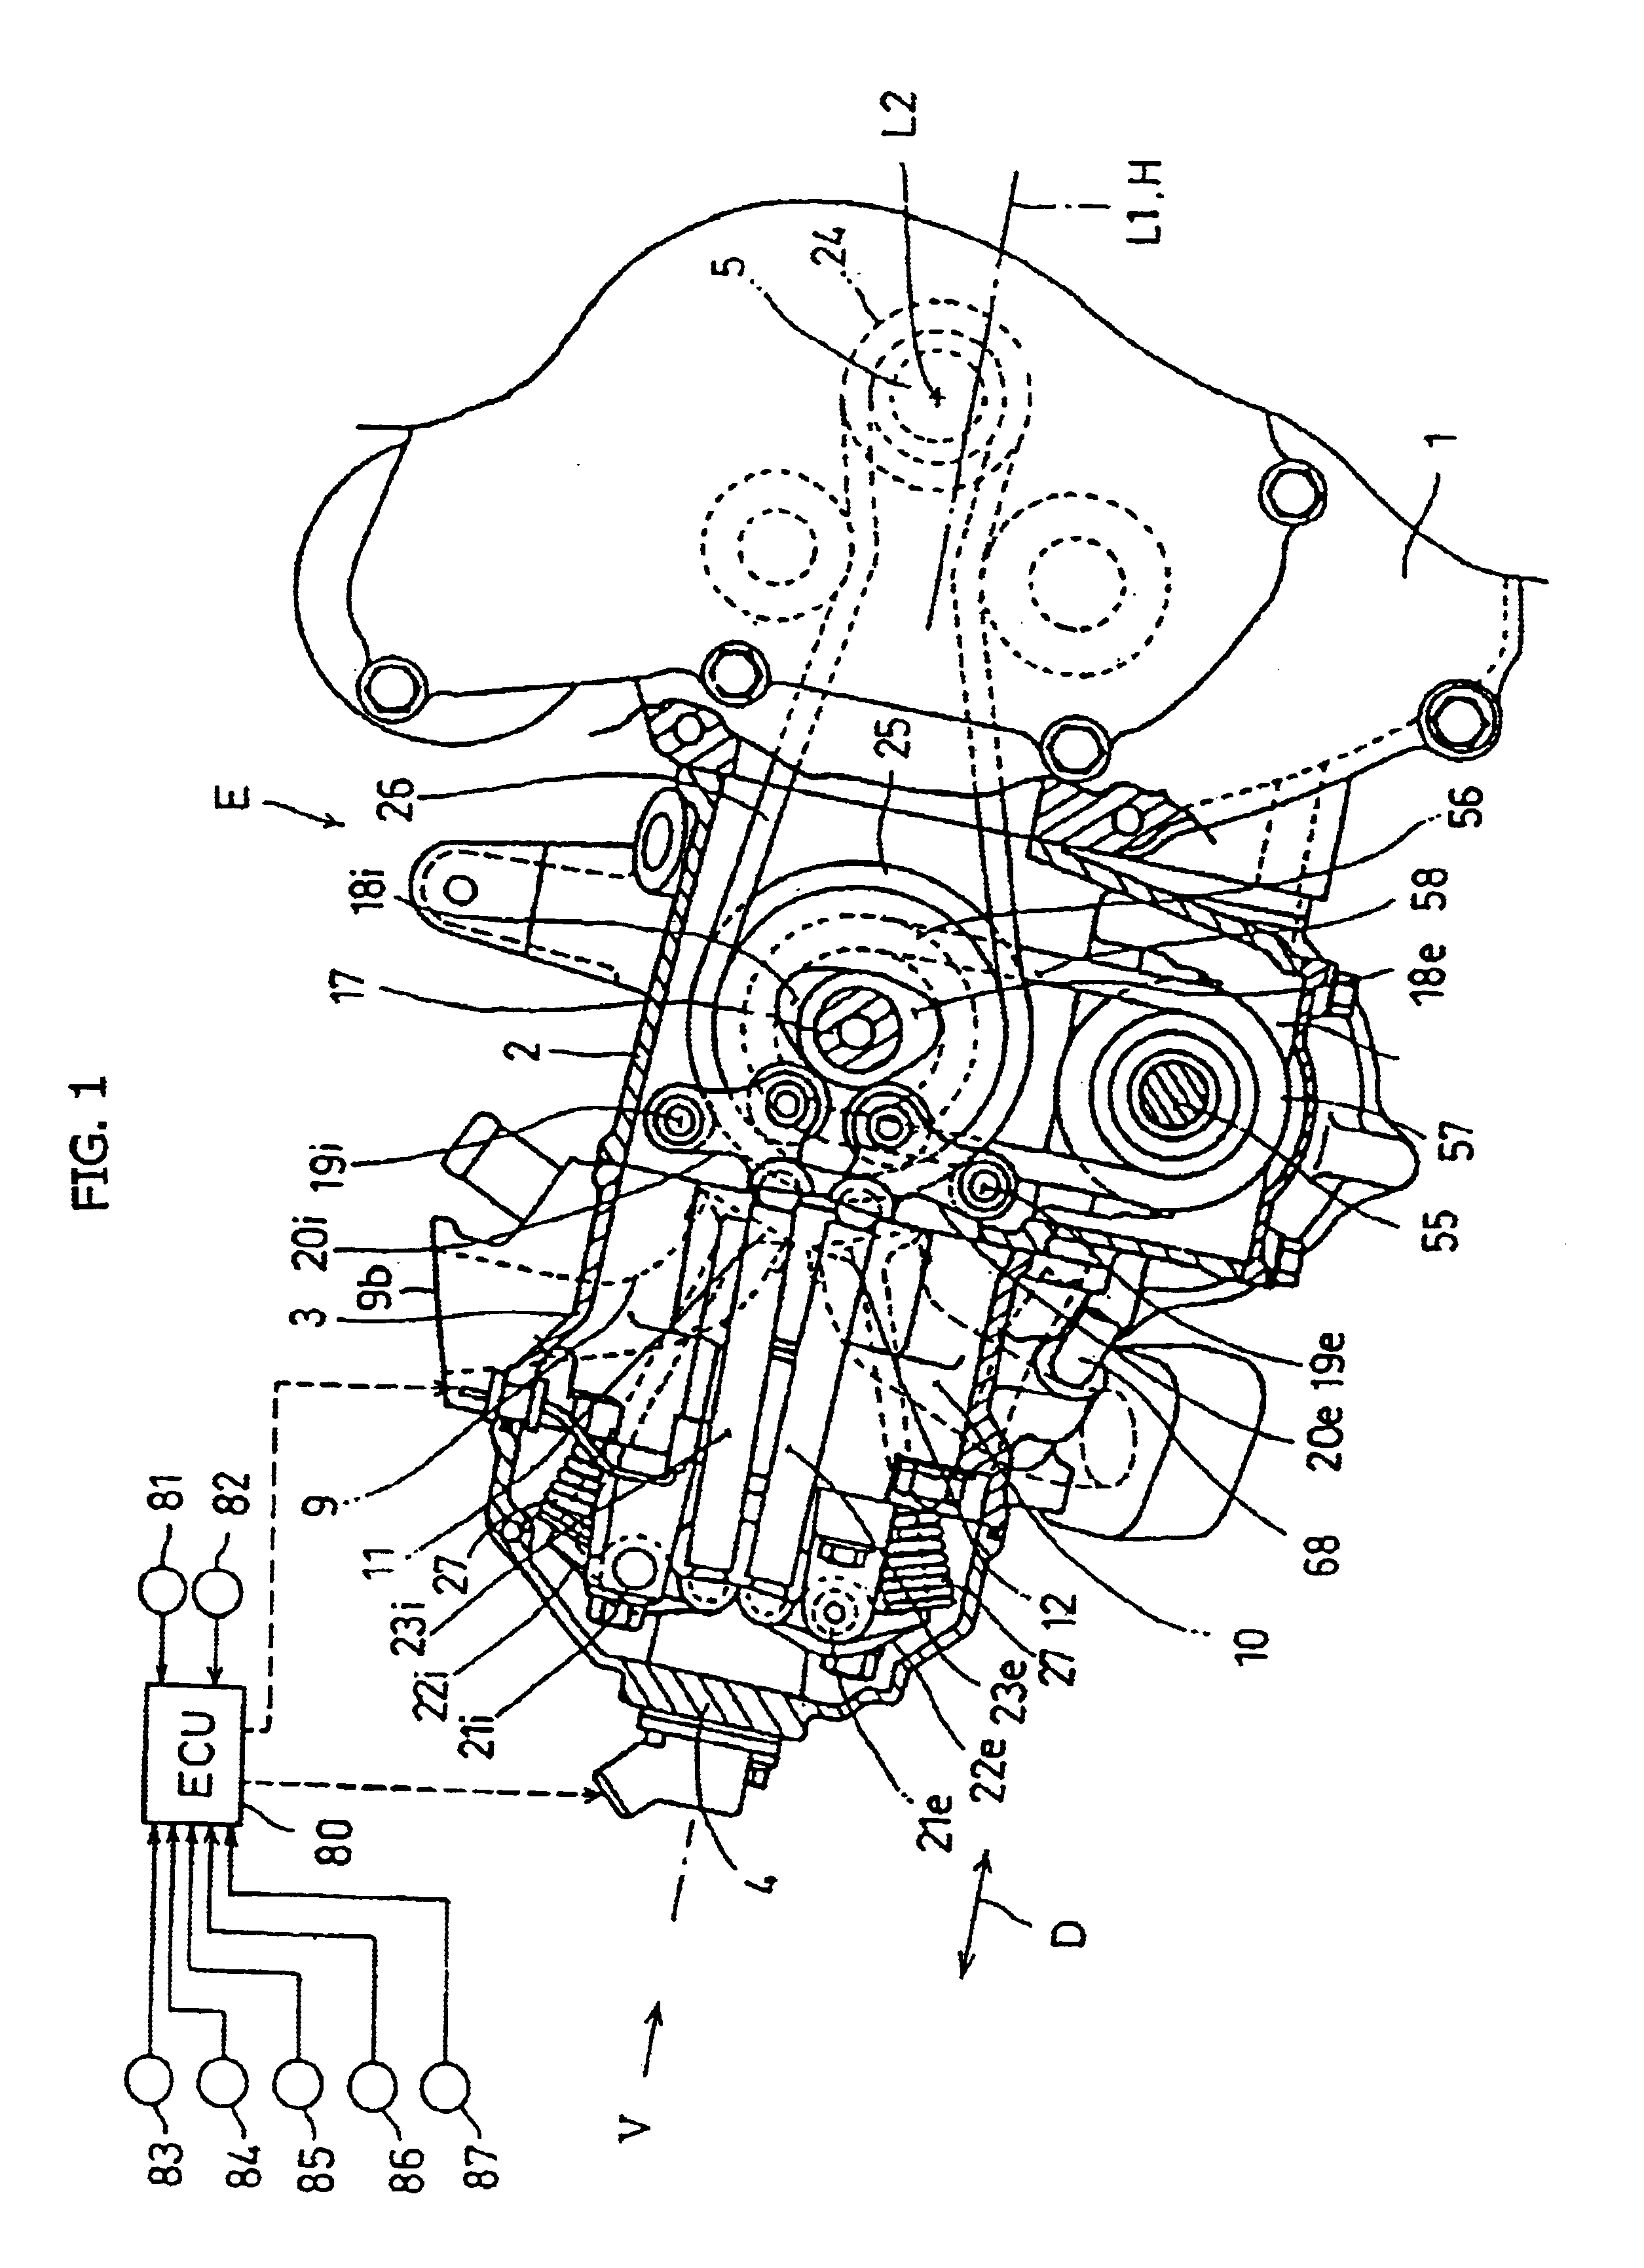 Charge-injected internal combustion engine, and method of operating same